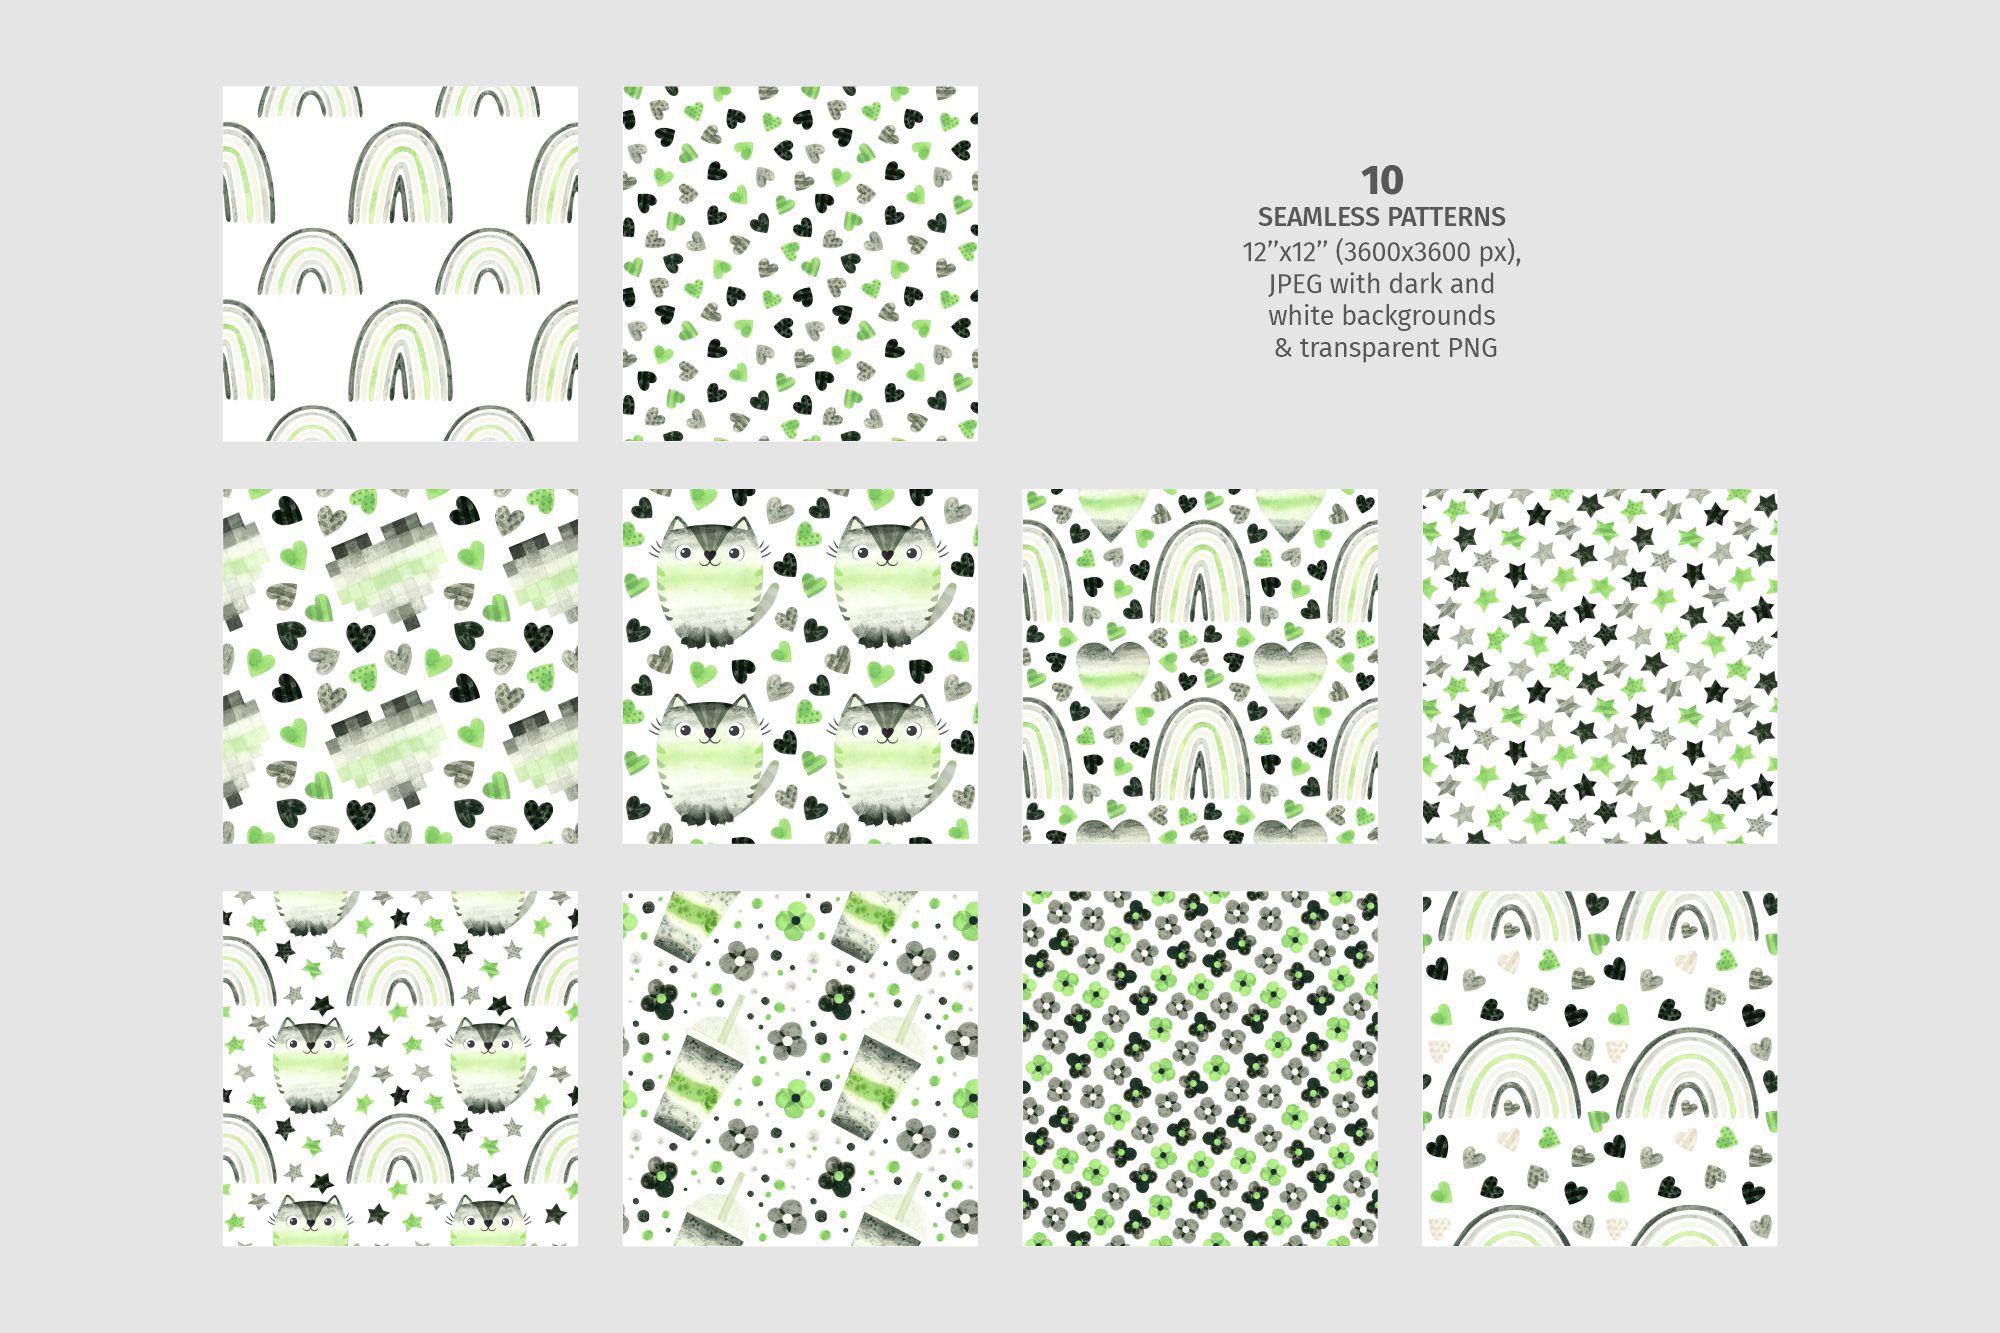 Agender pride clipart and seamless white patterns.